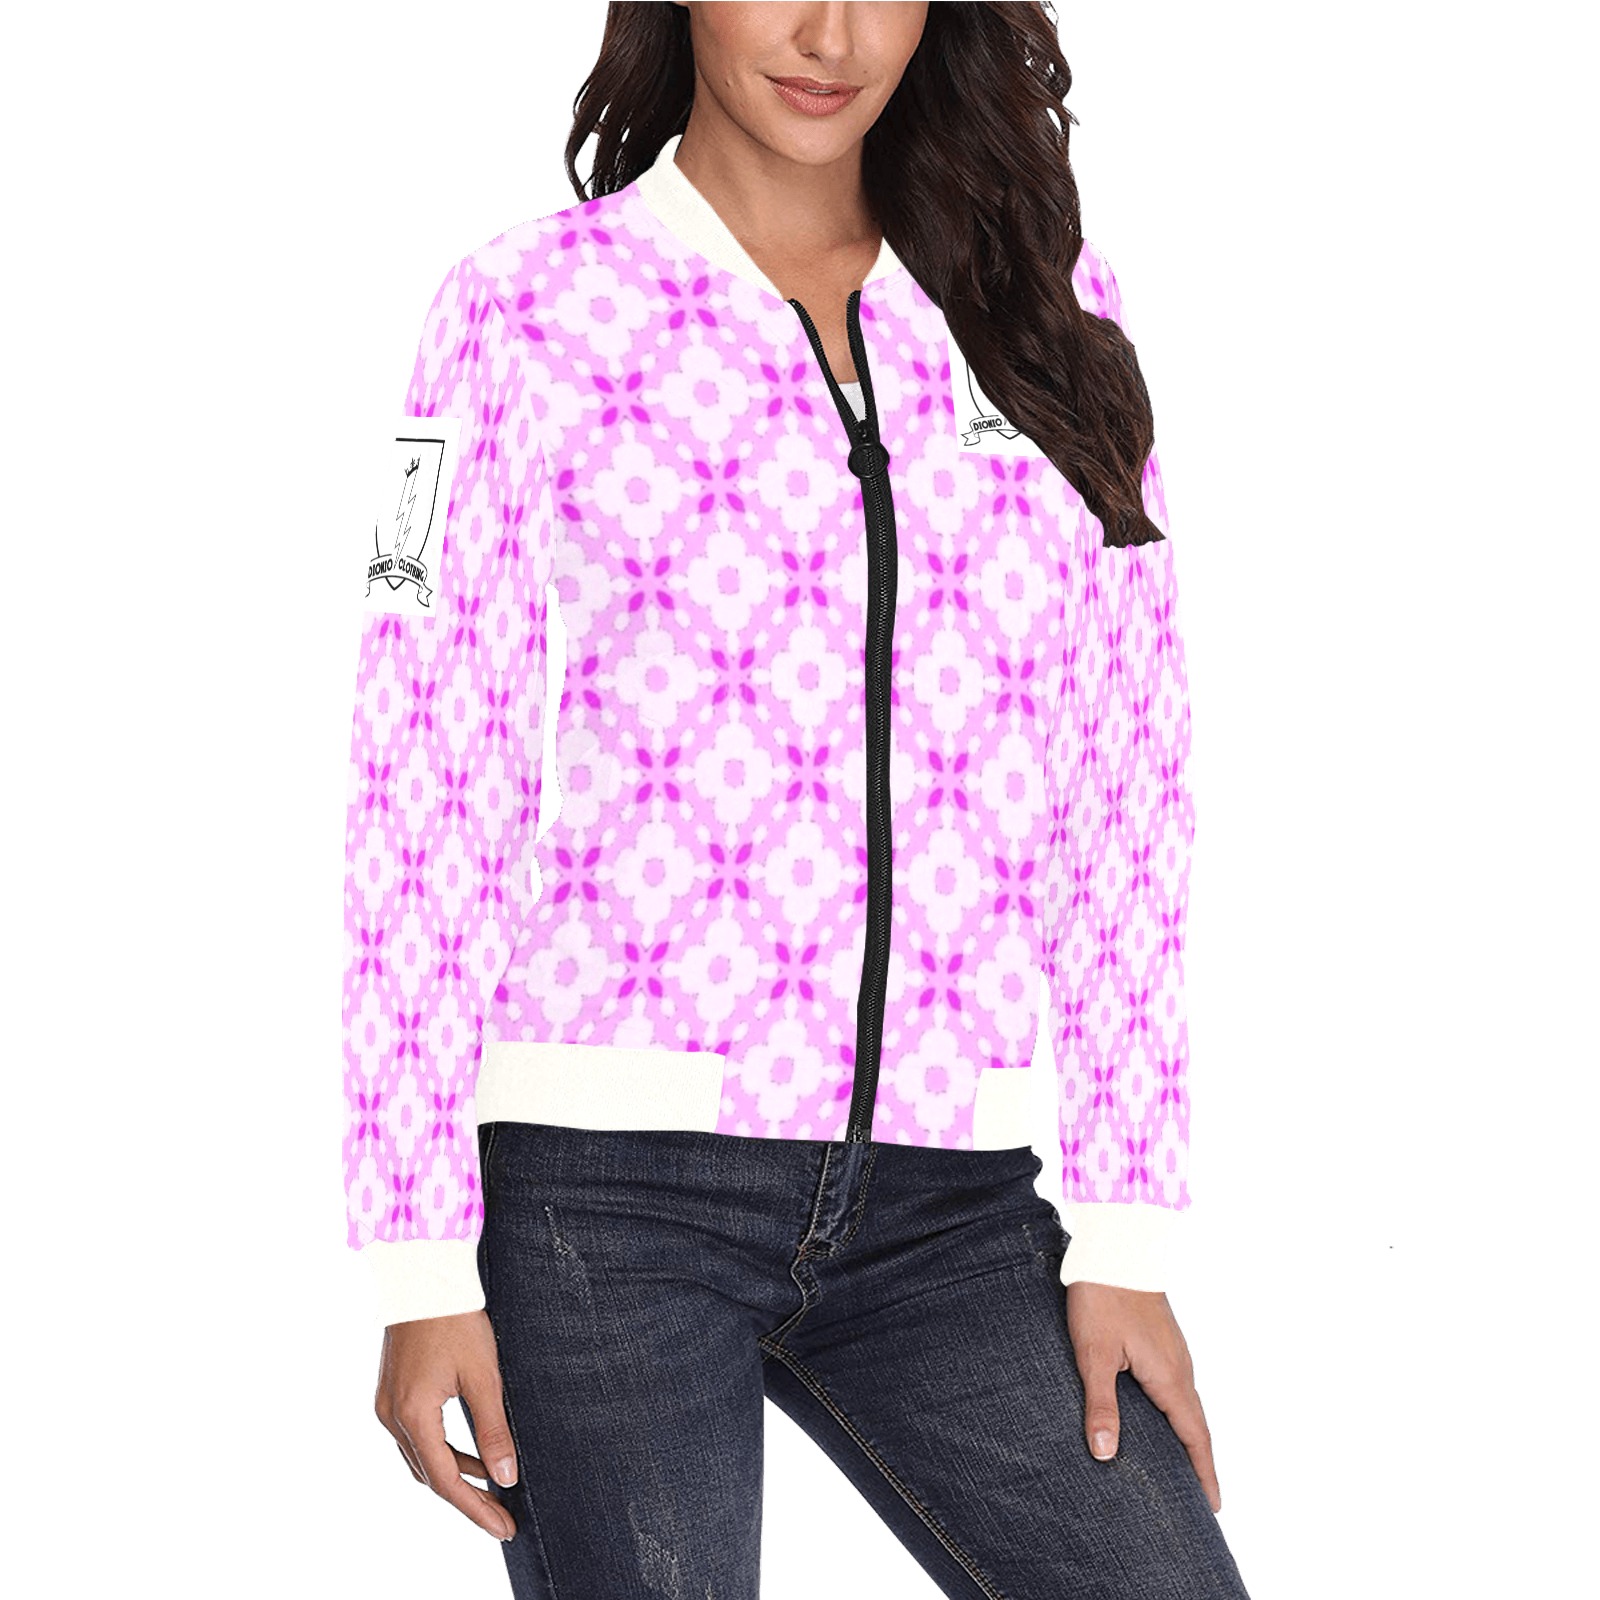 DIONIO Clothing - Ladies Bomber Jacket (Pink) All Over Print Bomber Jacket for Women (Model H36)